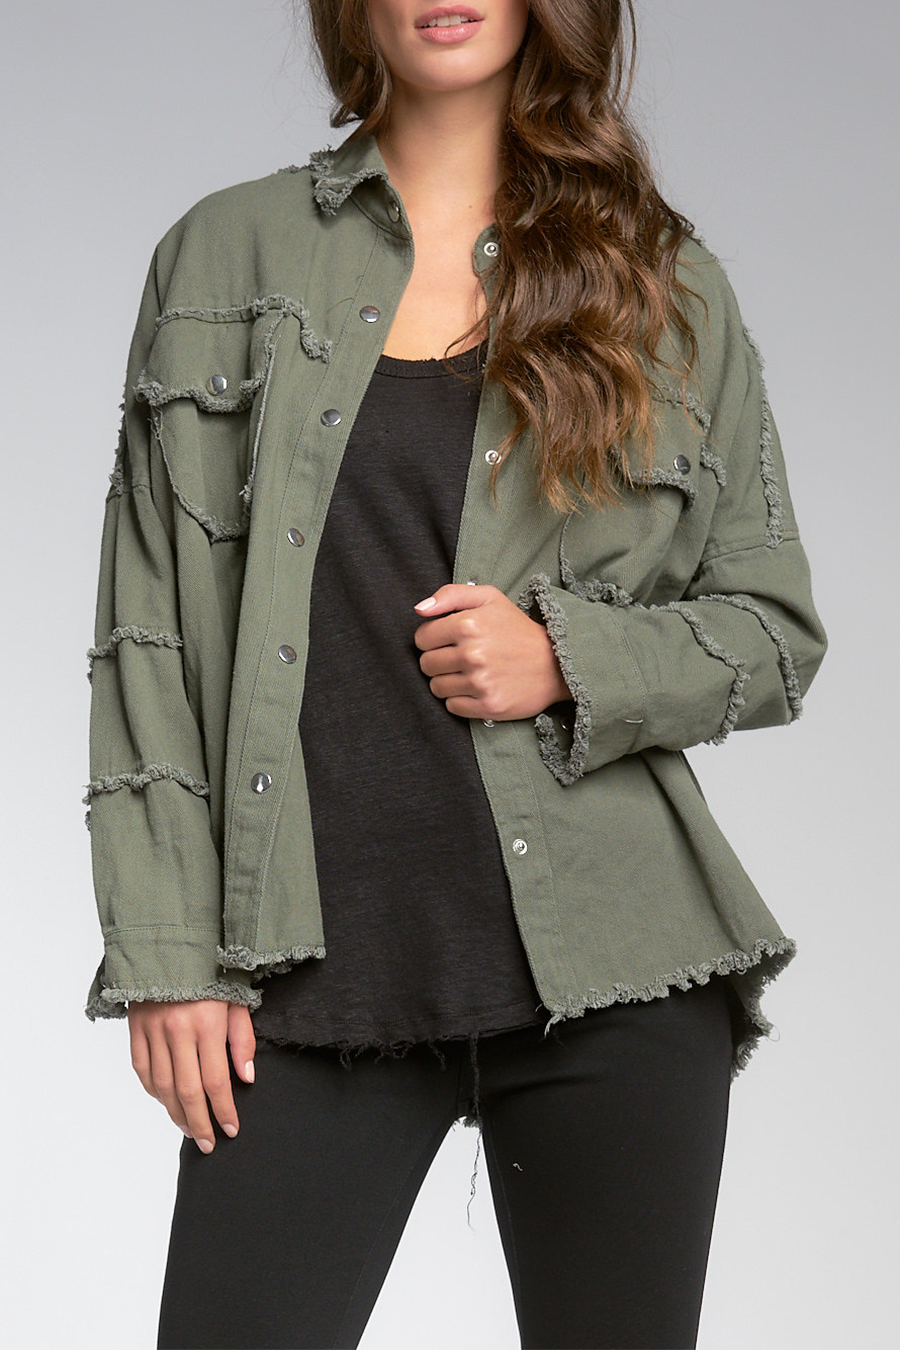 Distressed Rock & Roll Jacket | Olive - Main Image Number 3 of 3